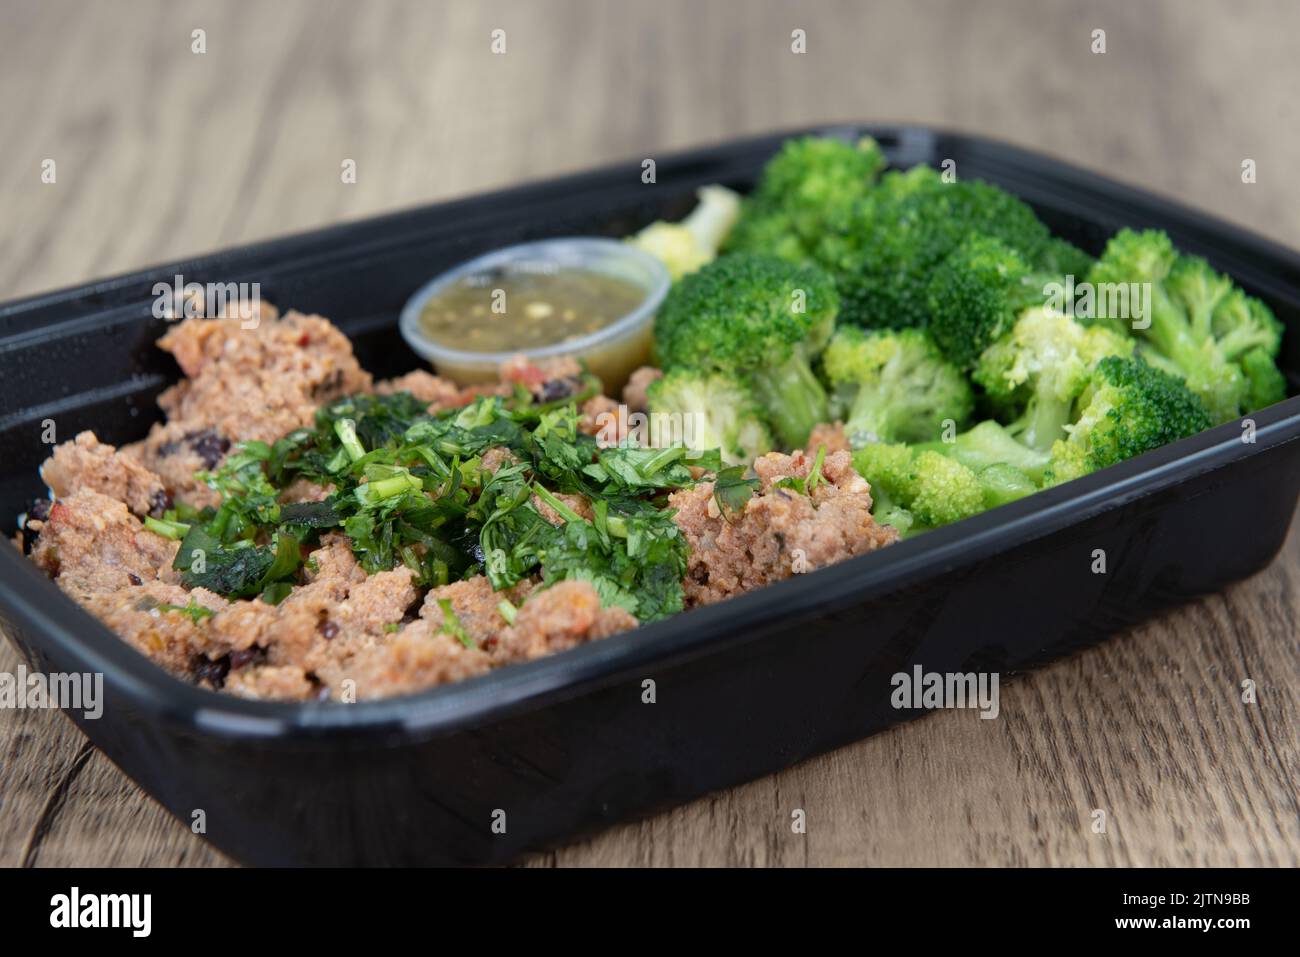 Take out order of ground turkey with rice and broccoli is conveniently packed in a microwavable container. Stock Photo